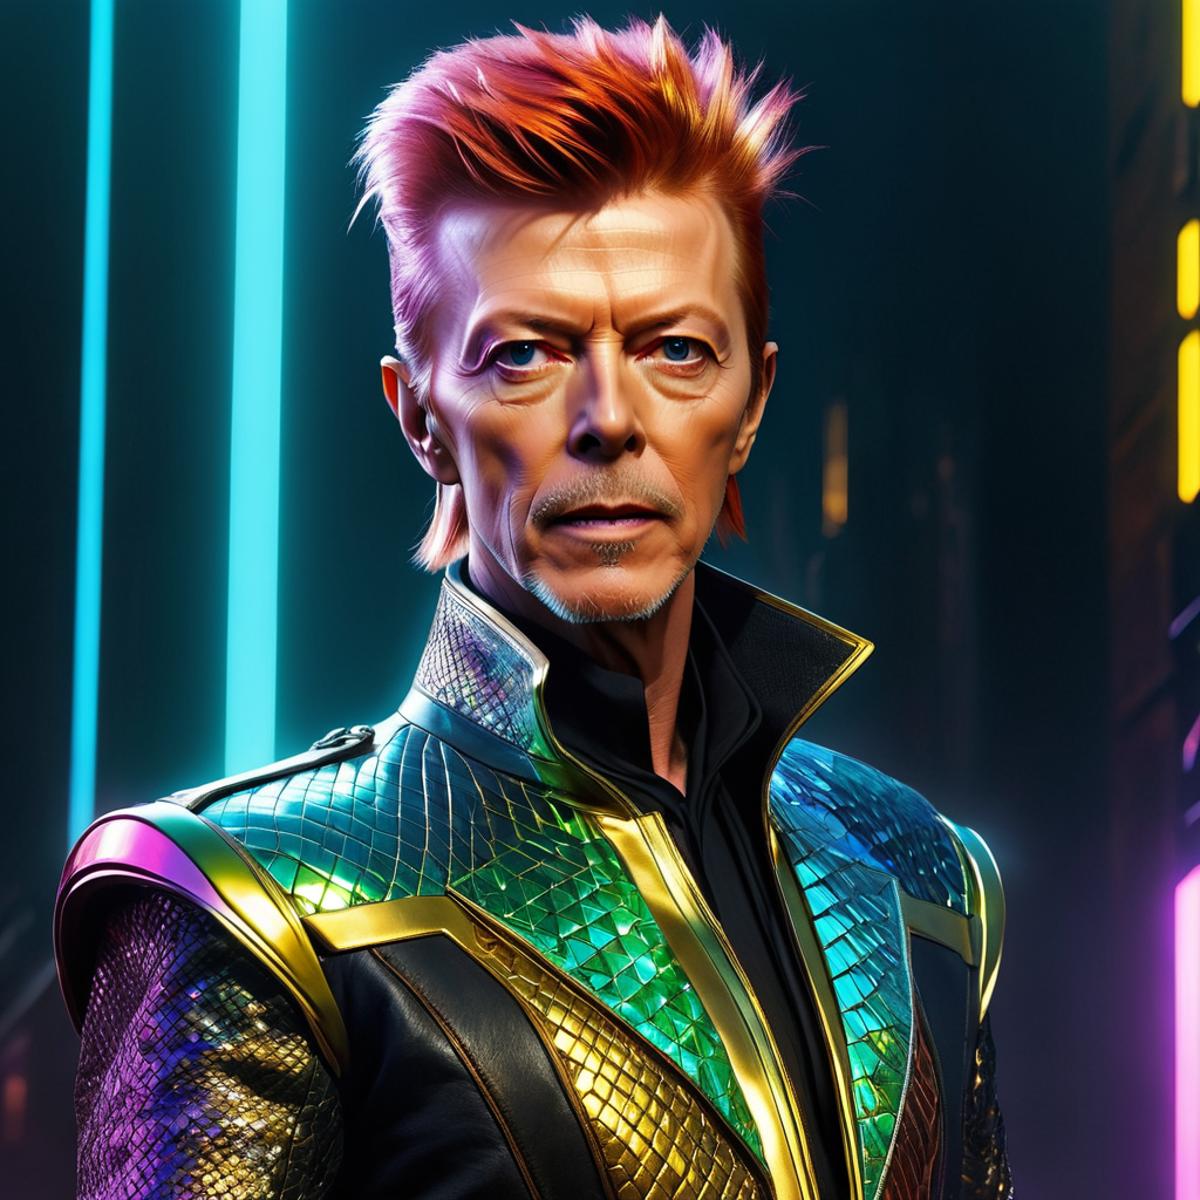 A digital artwork of David Bowie wearing a green and gold suit.